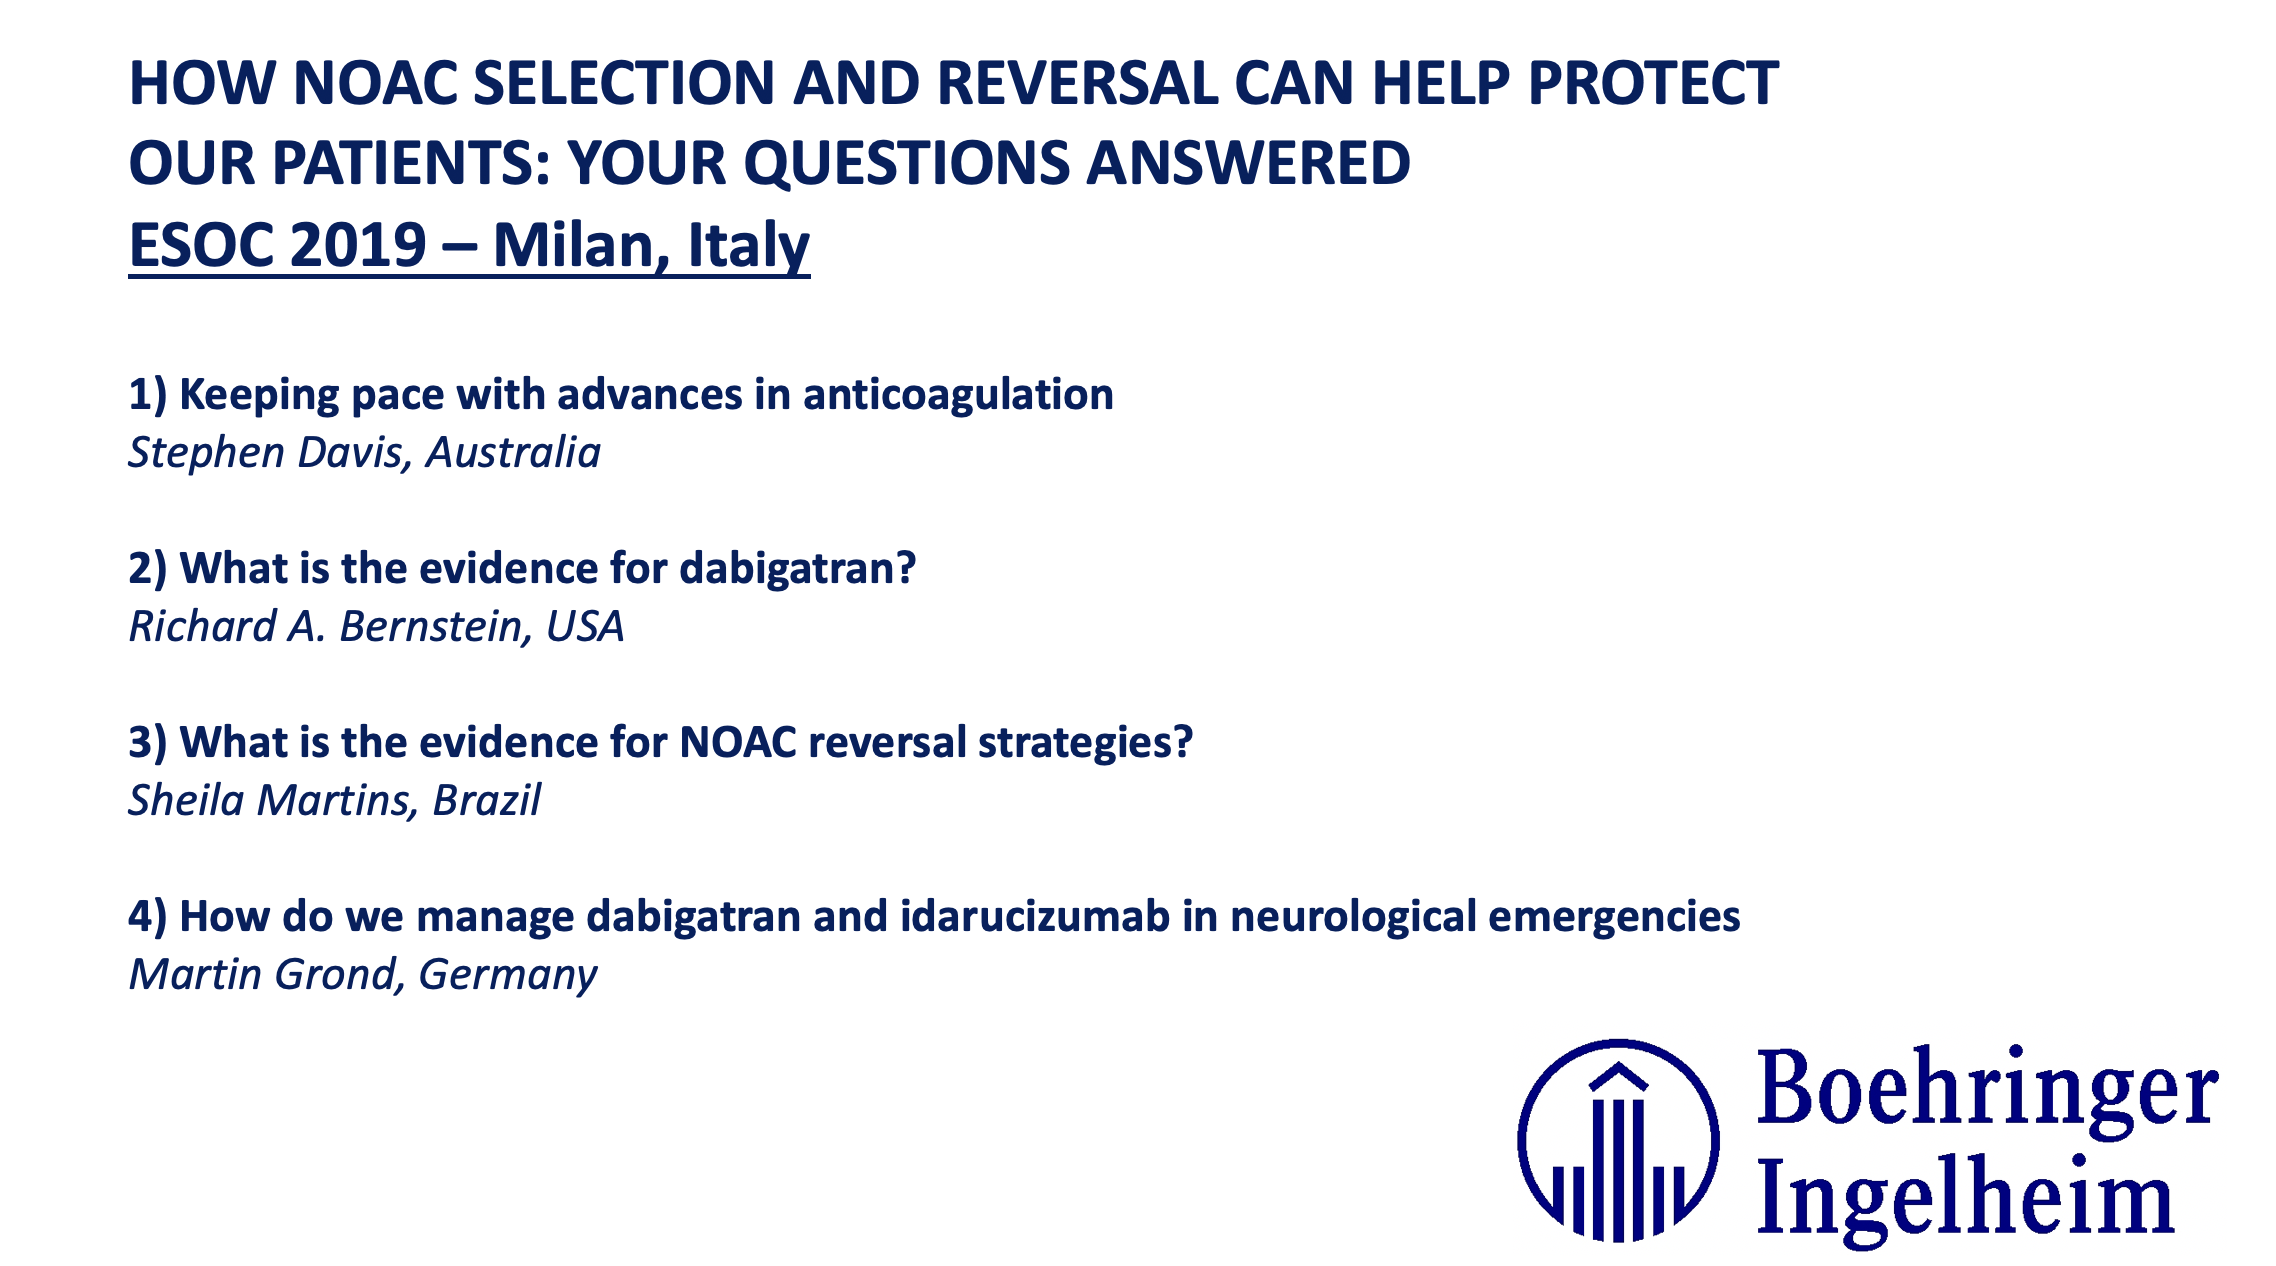 Boehringer Ingelheim: ESOC 2019 – How NOAC selection and reversal can help protect our patients: Your questions answered